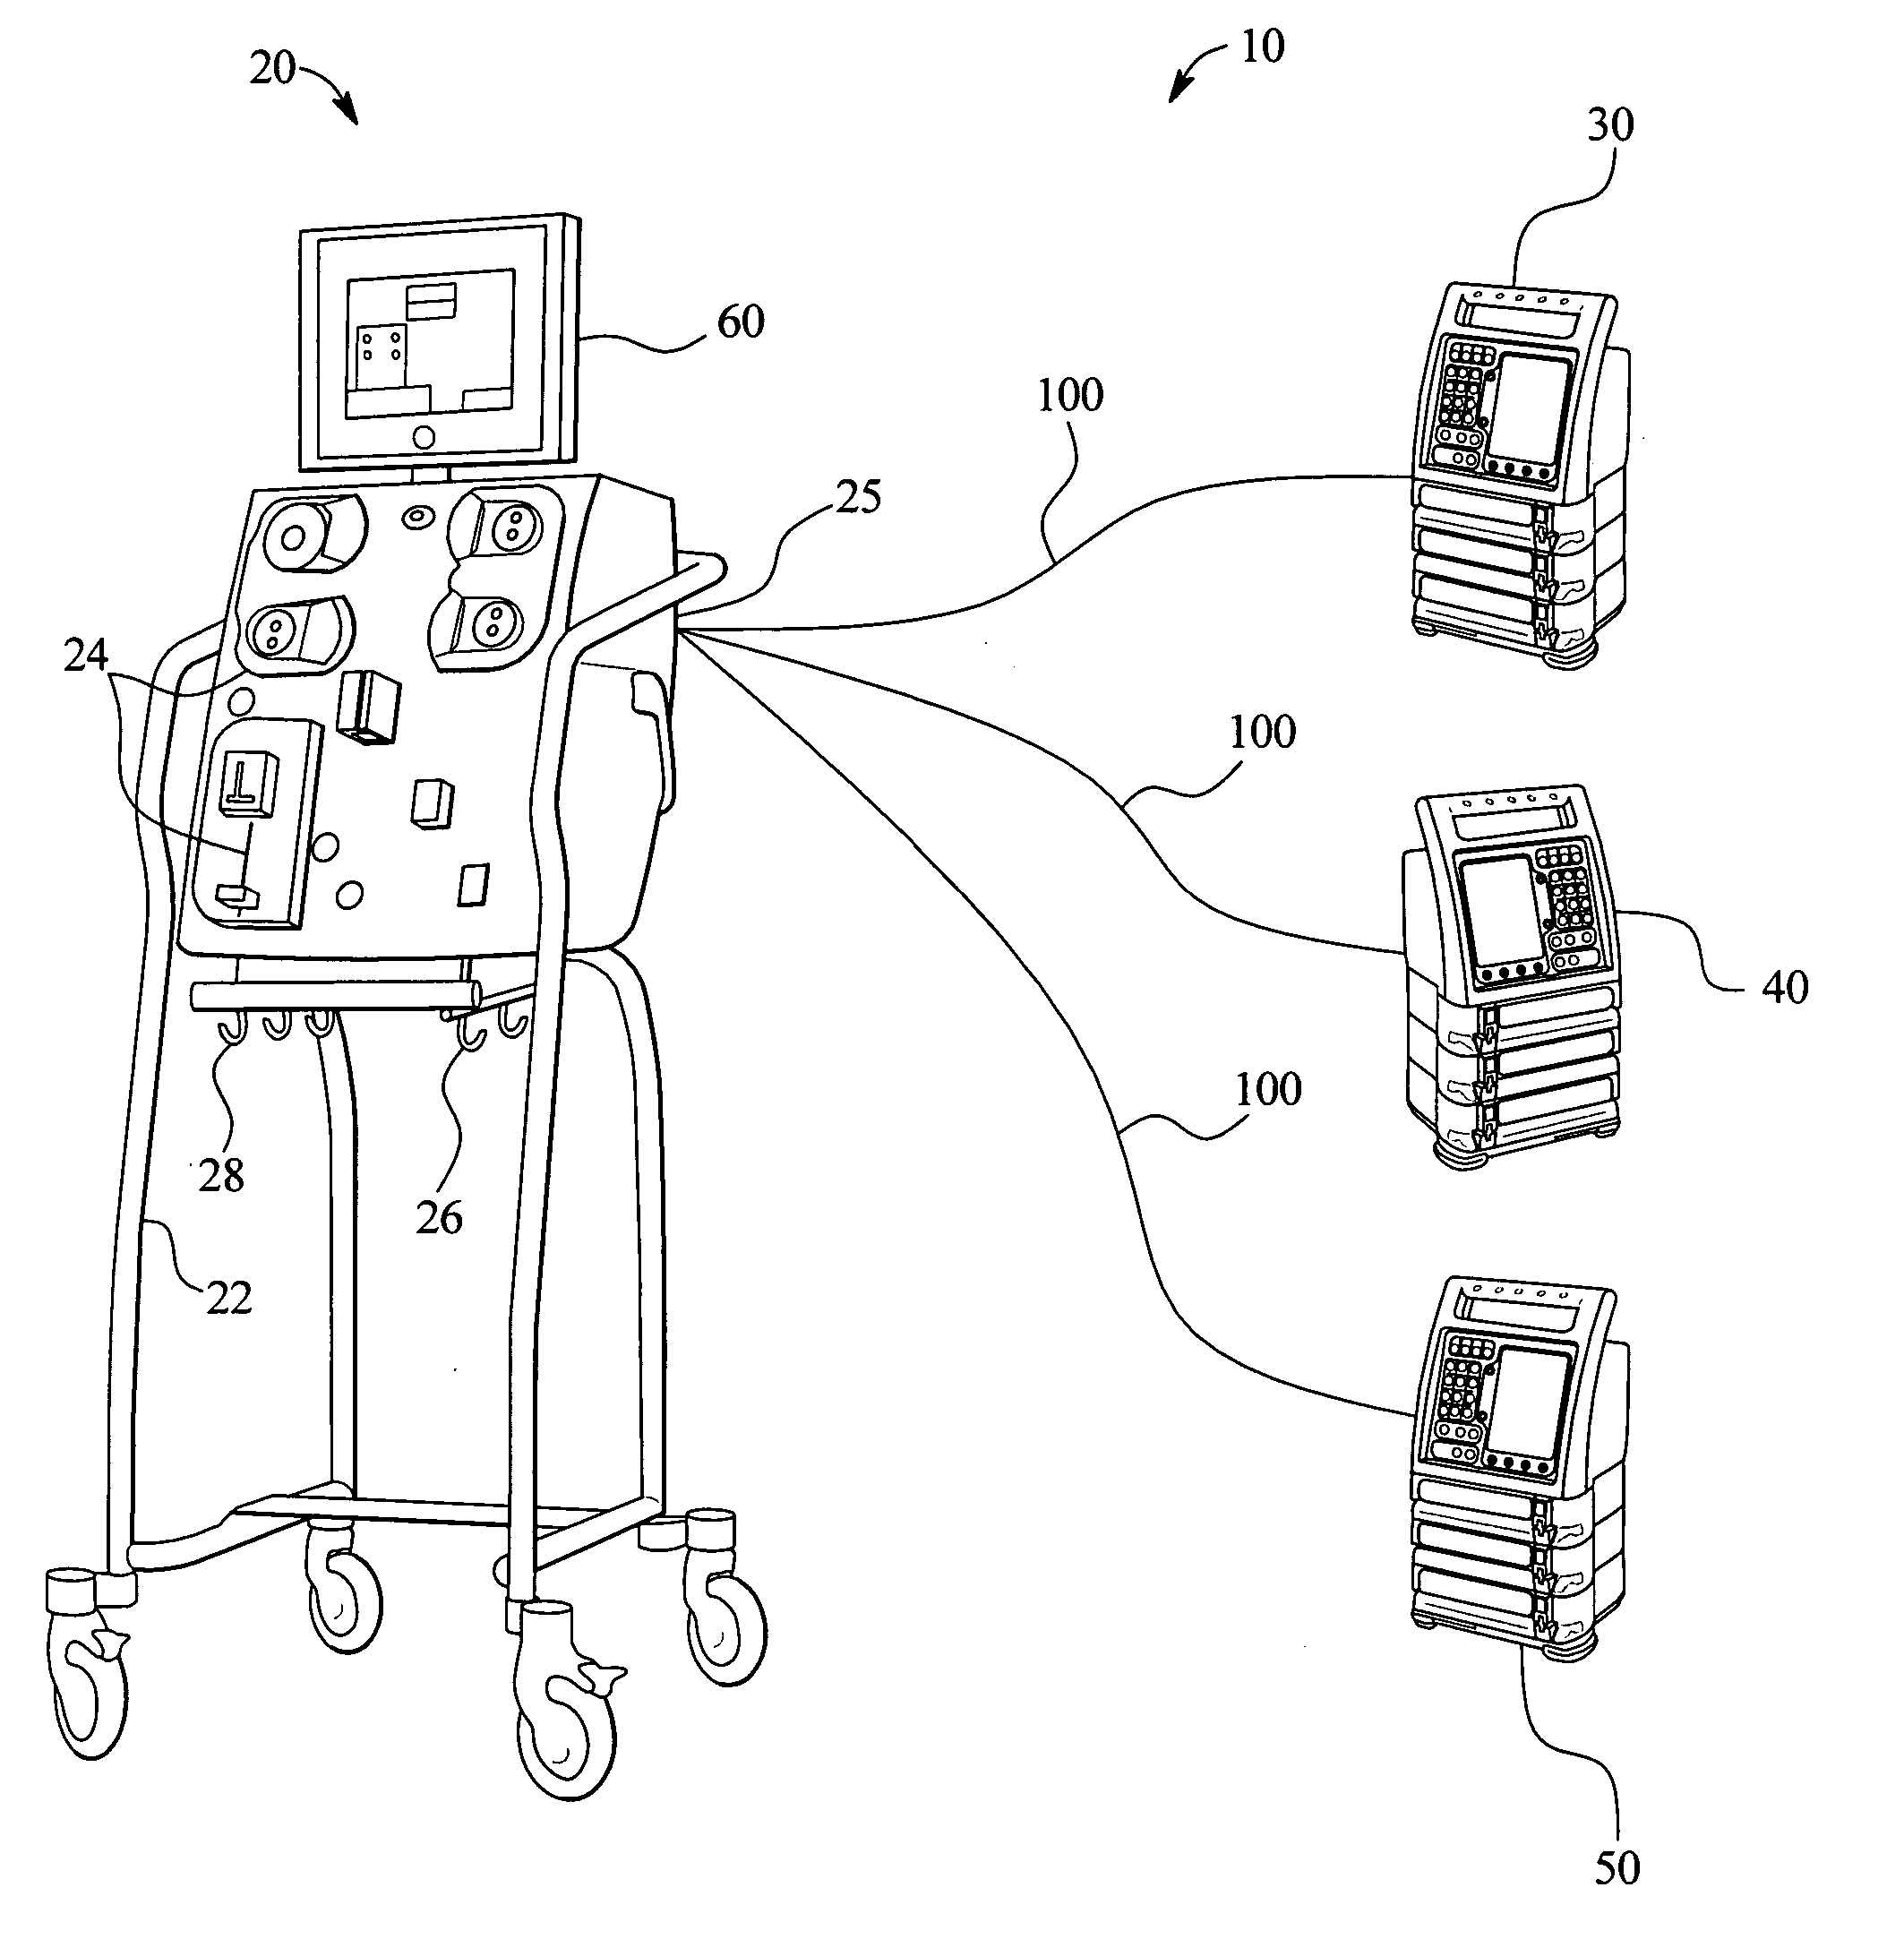 Medical fluid therapy flow balancing and synchronization system